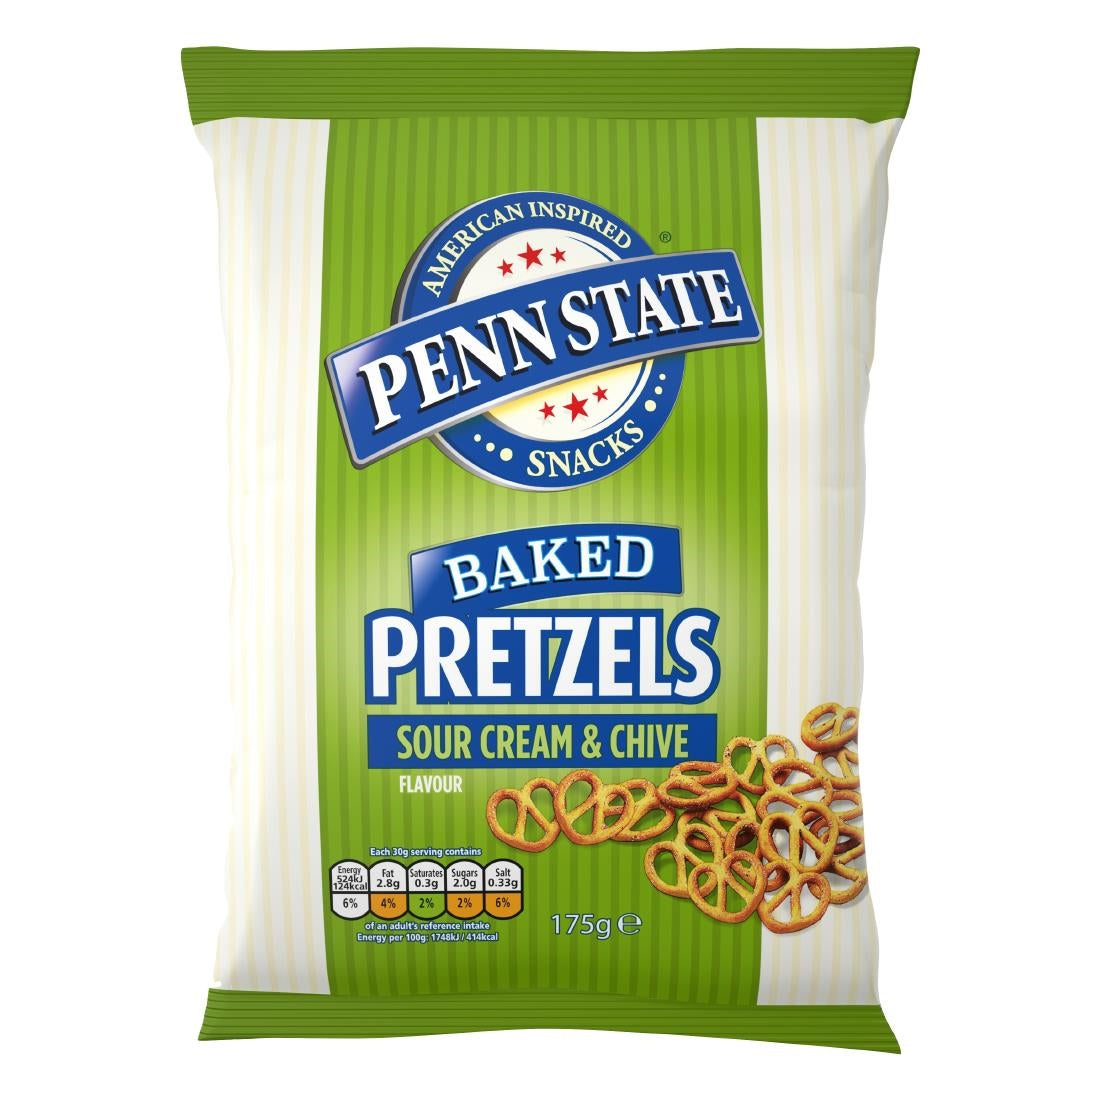 CZ287 Penn State Sour Cream & Chive Sharing Pretzels (8x175g) JD Catering Equipment Solutions Ltd